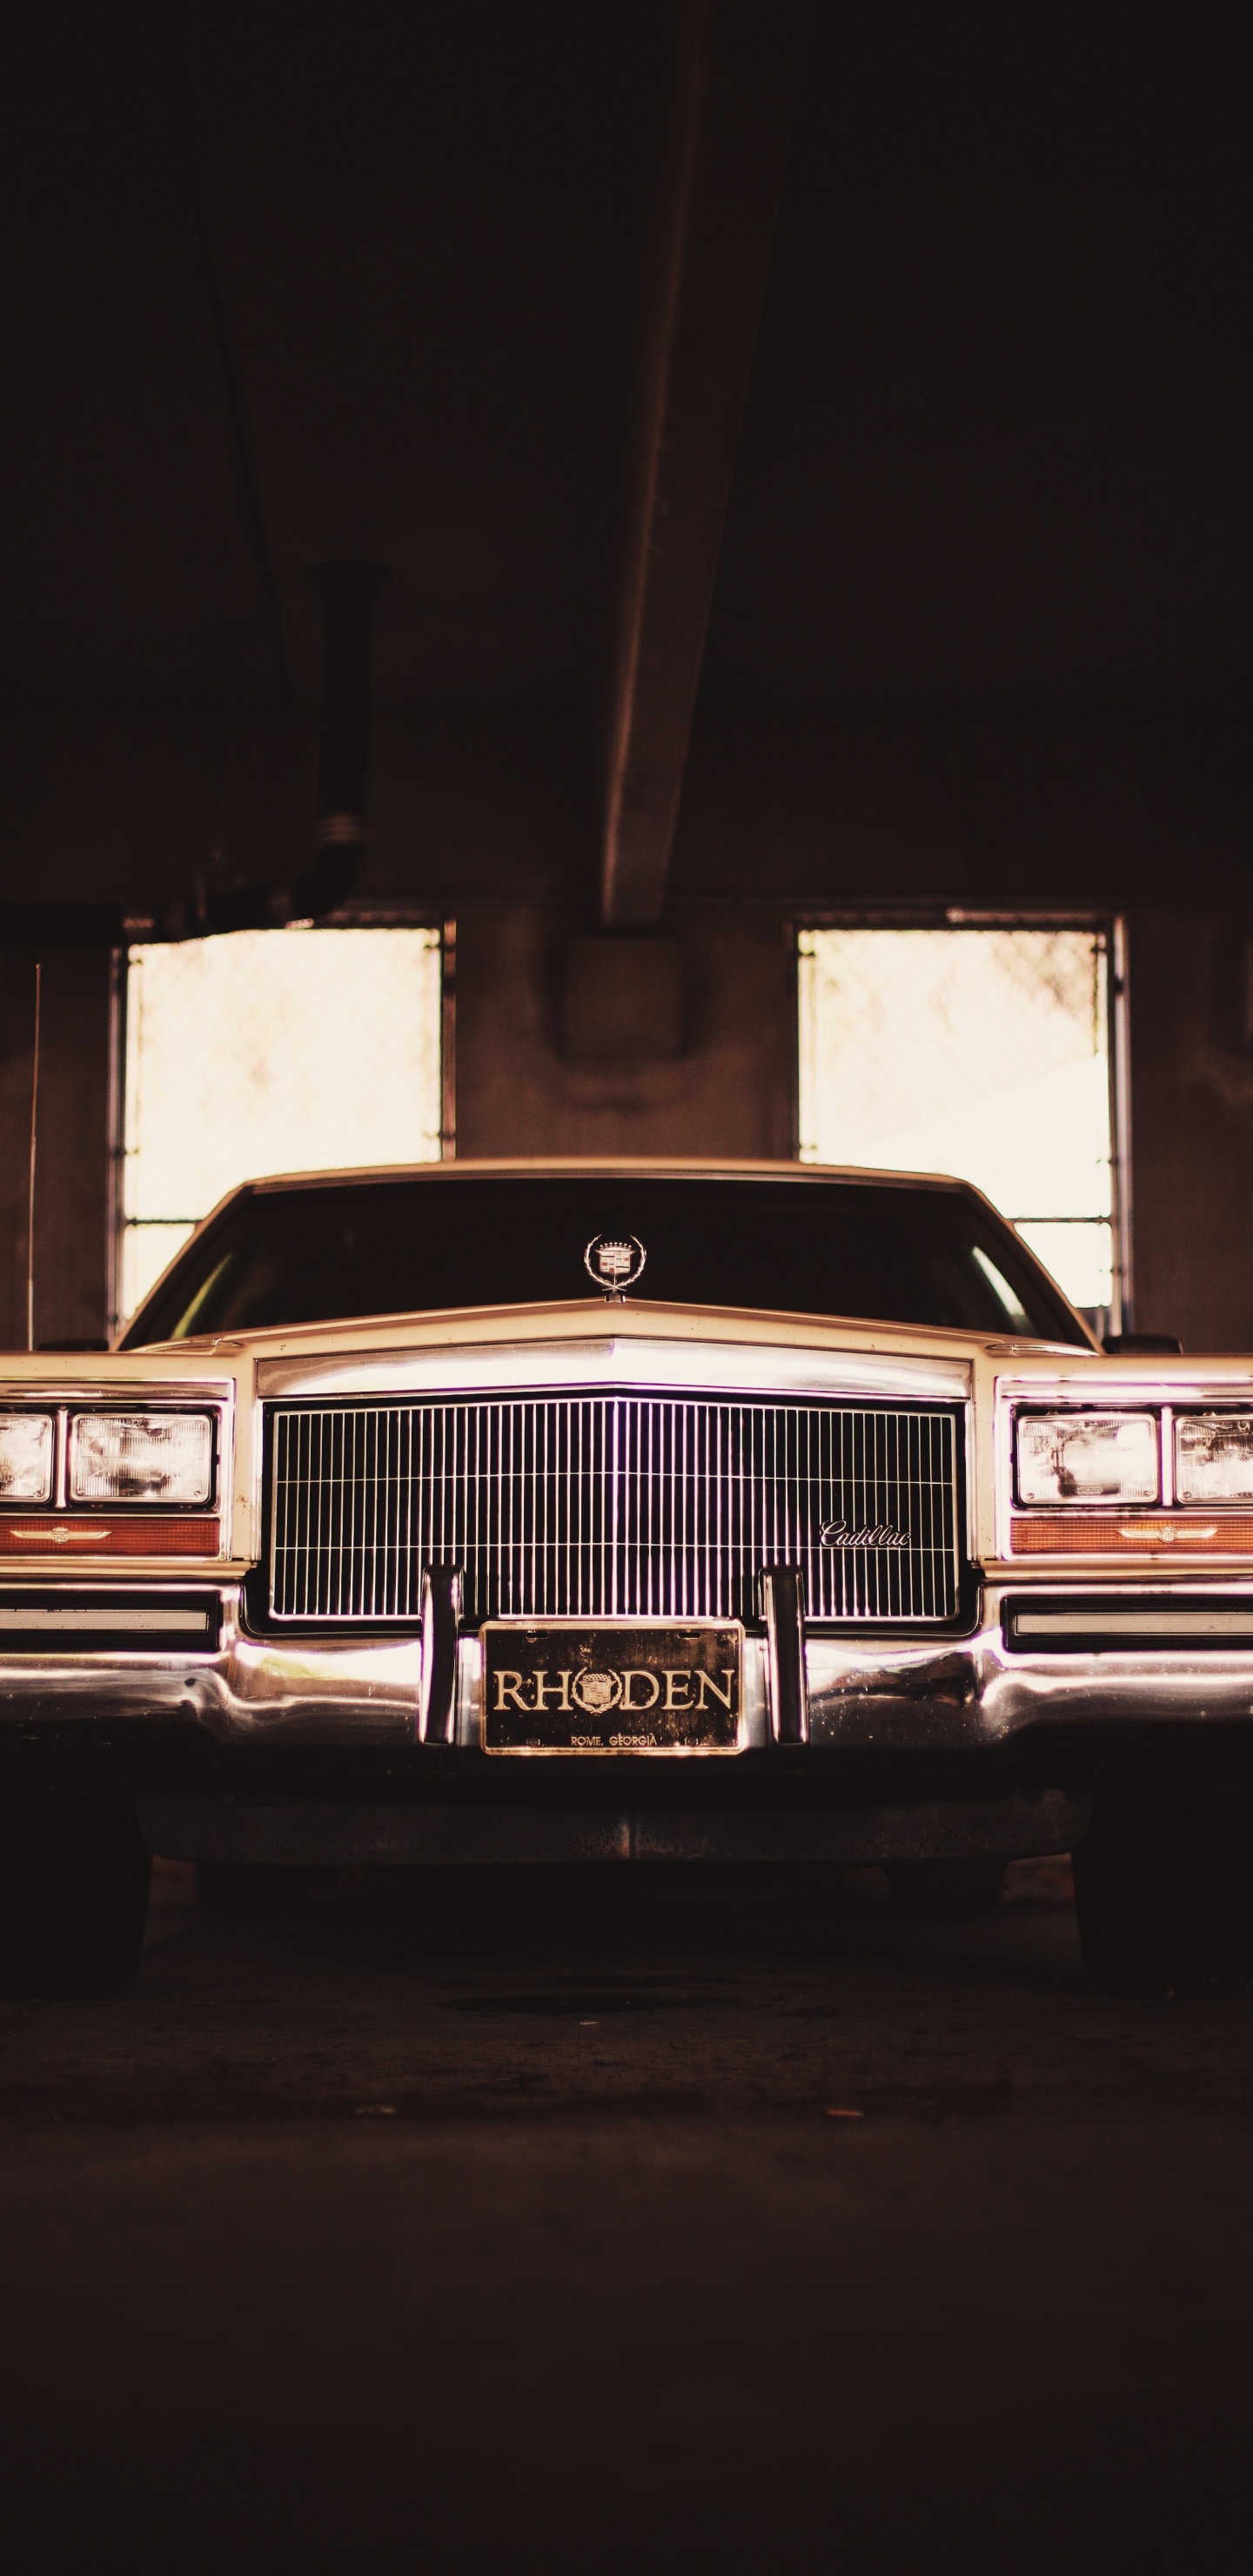 Classic Brown Car in a Garage. Wallpaper in 1440x2960 Resolution